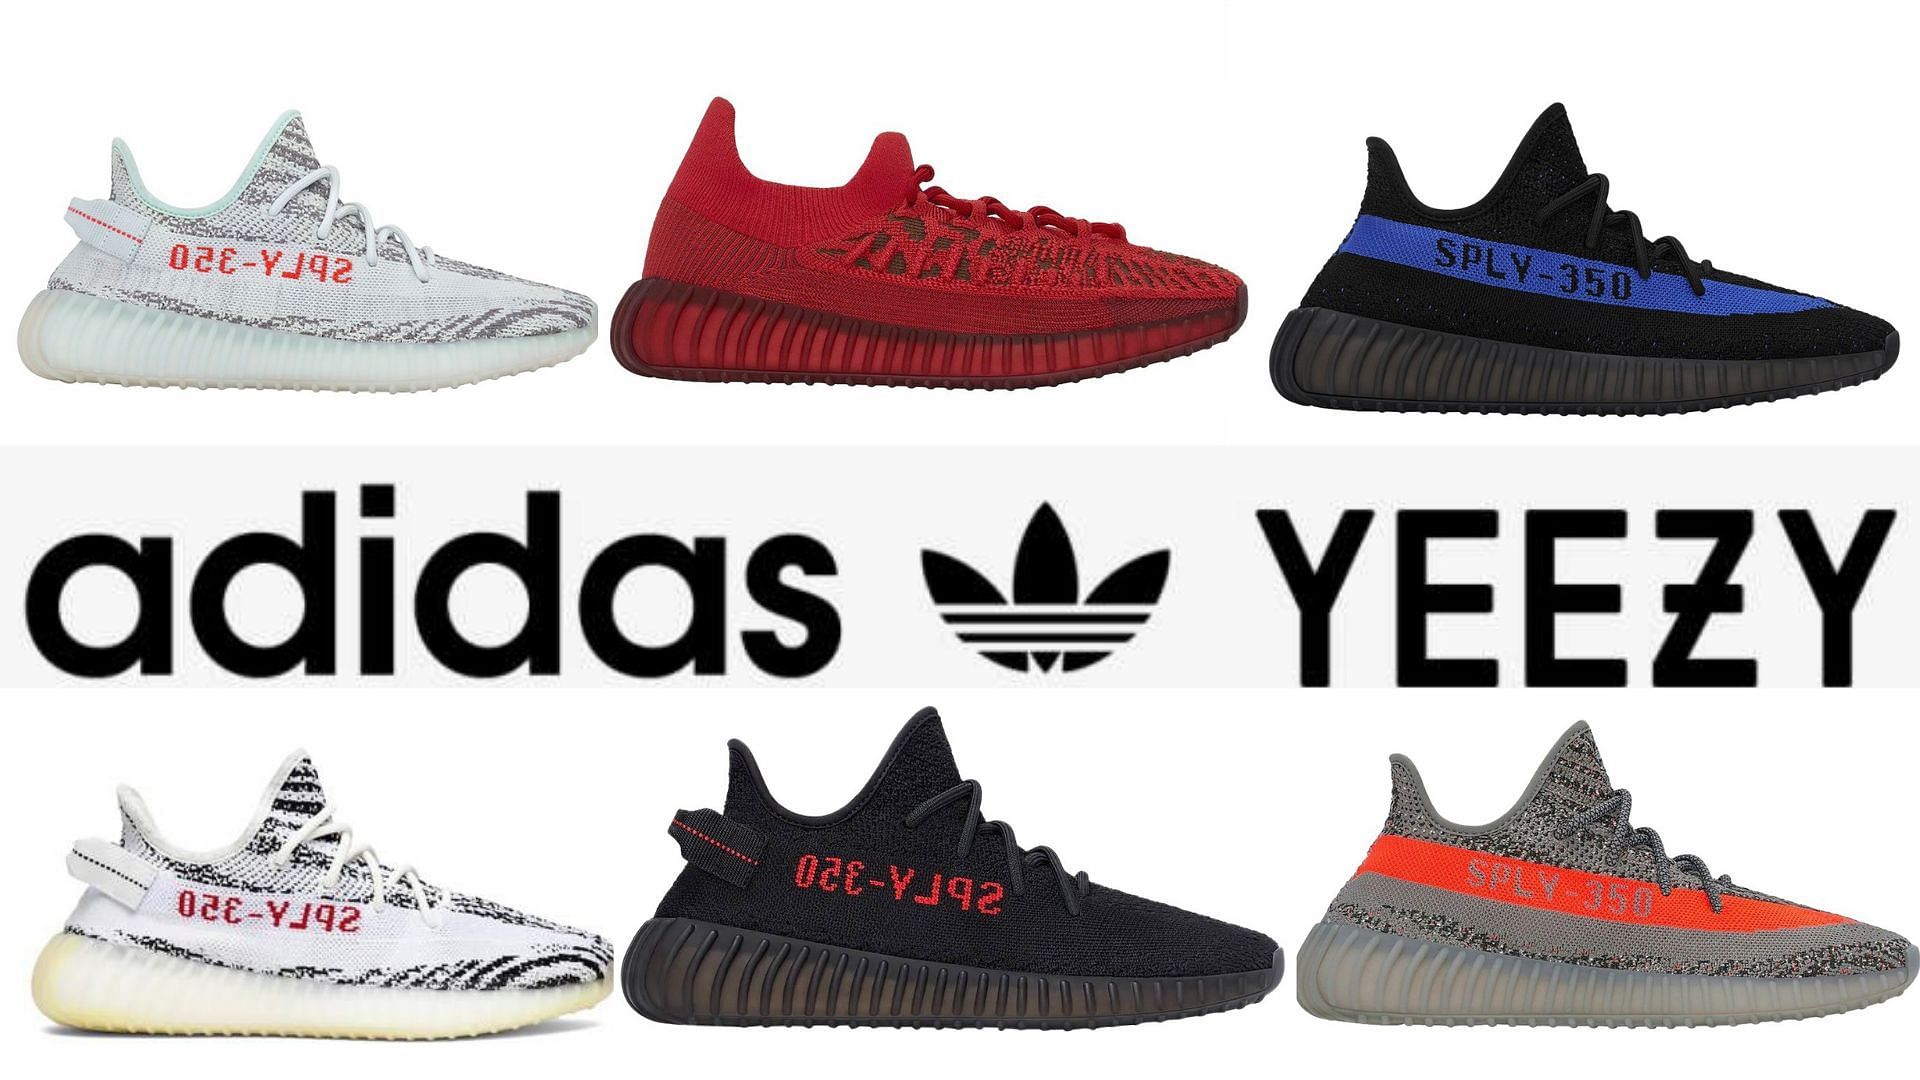 Rama Circunferencia interrumpir 6 Adidas Yeezy Boost 350 V2 colorways to look out for